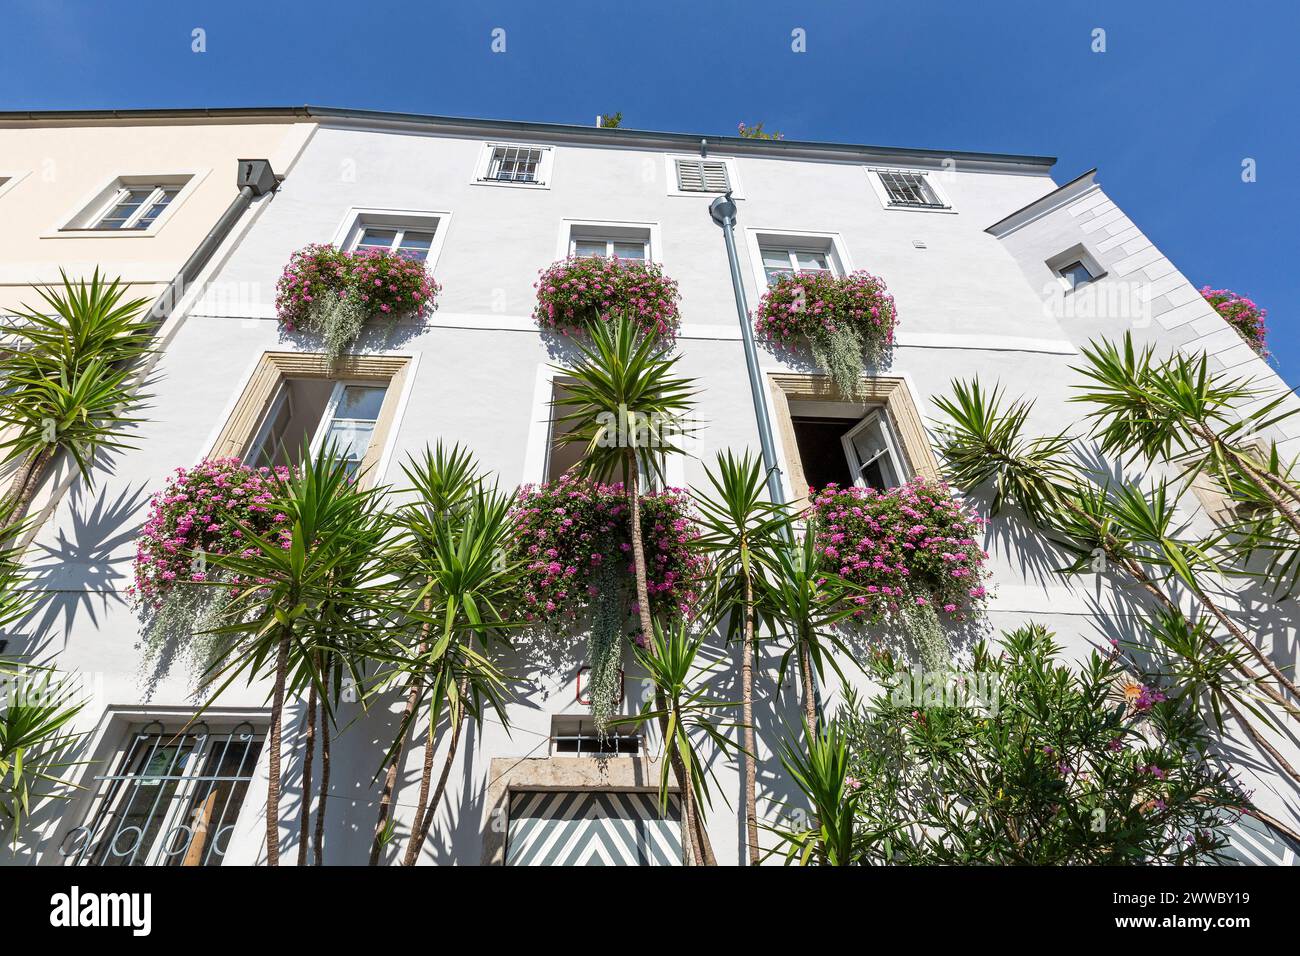 Flowers And Plant Decoration Residential Building, Wels, Upper Austria, Austria Stock Photo